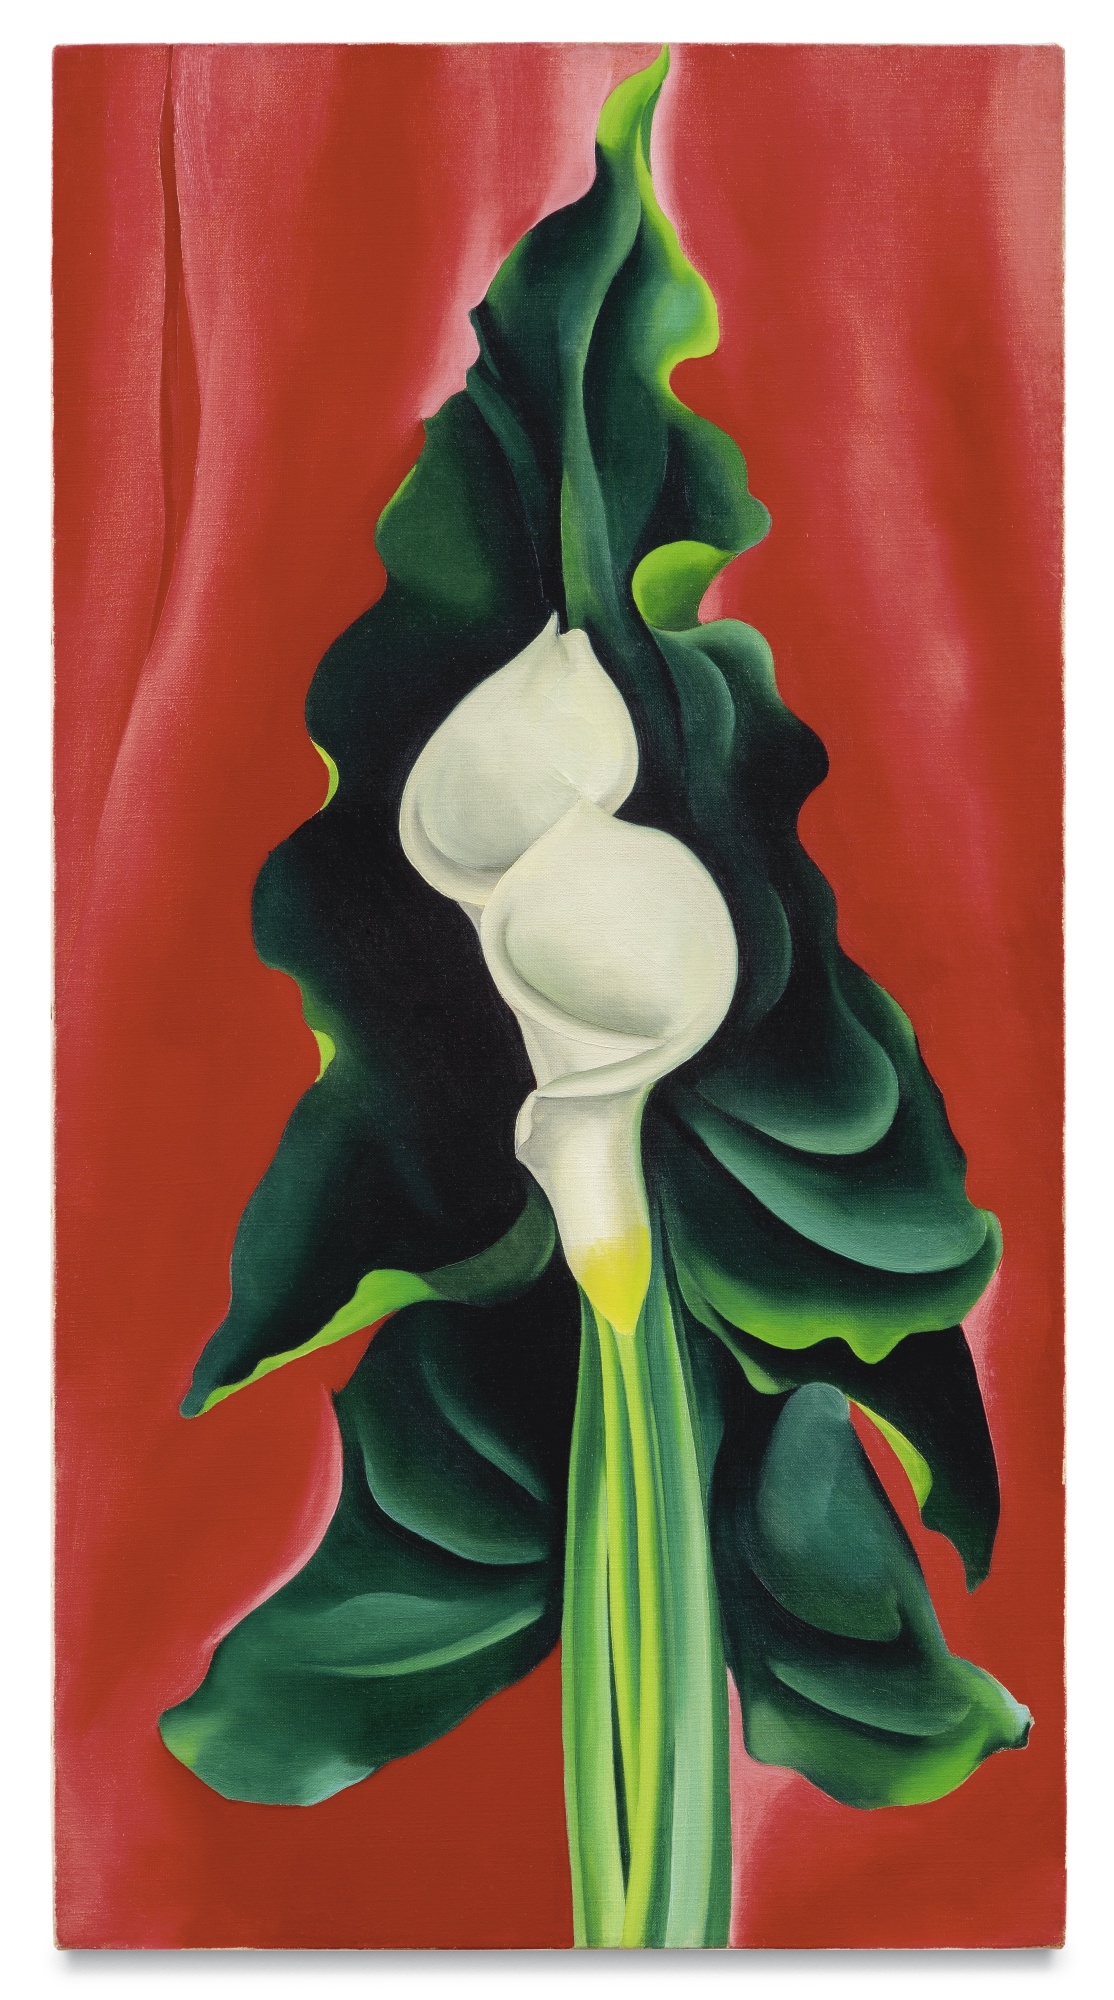 CALLA LILIES ON RED by Georgia O'Keeffe, 1928